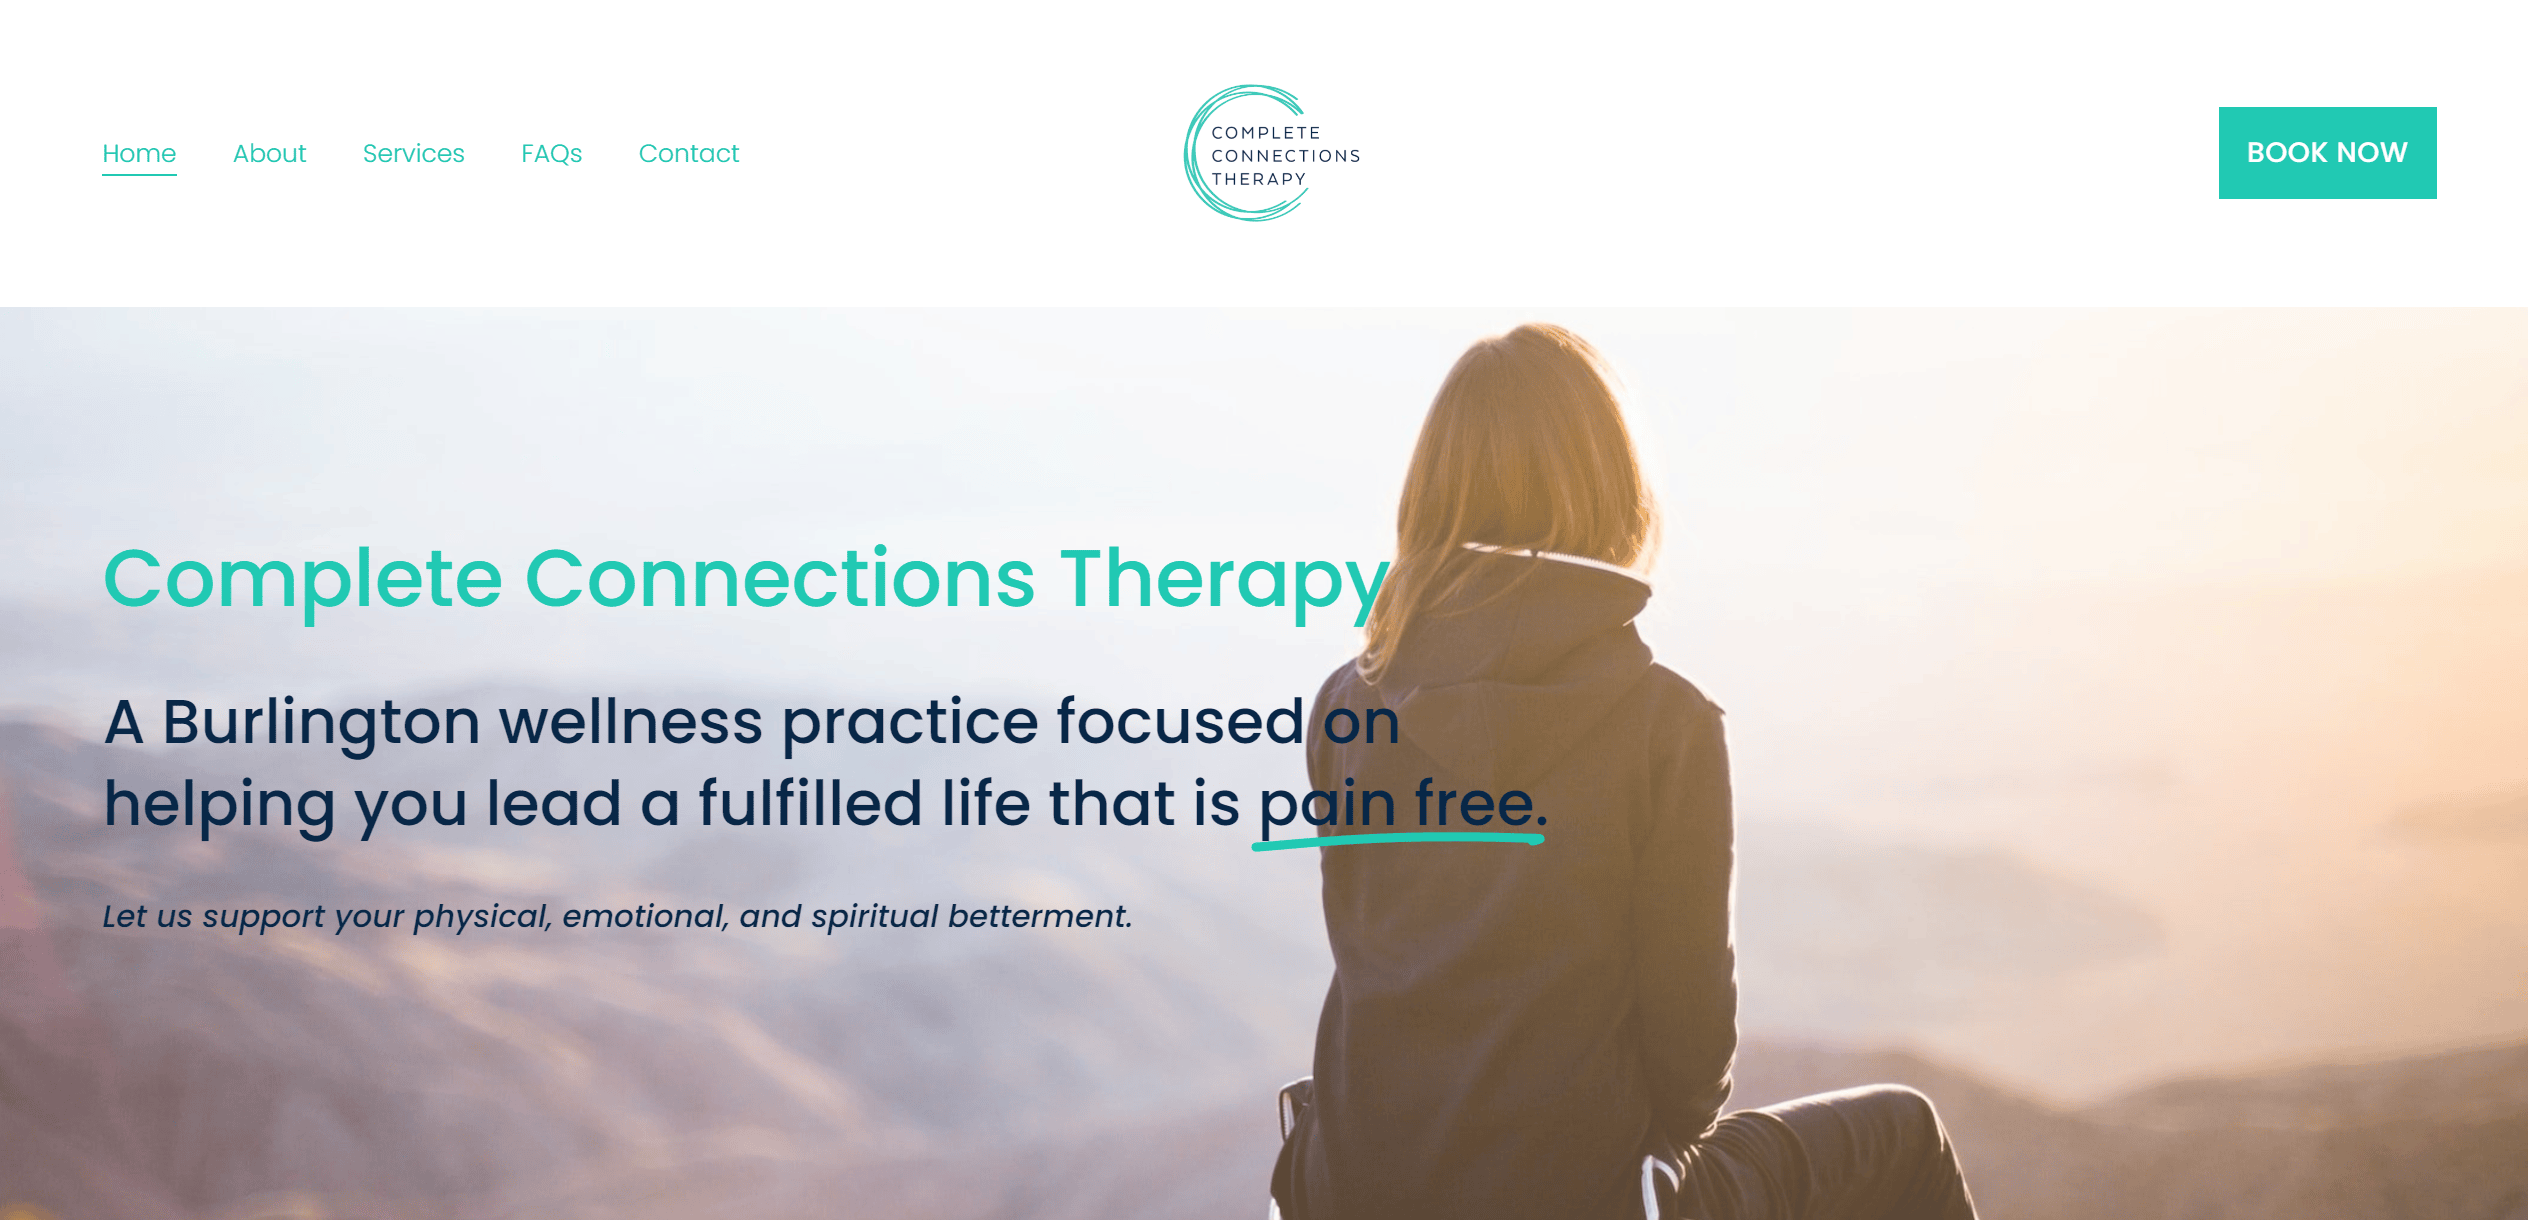 Home page of Complete Connections Therapy.